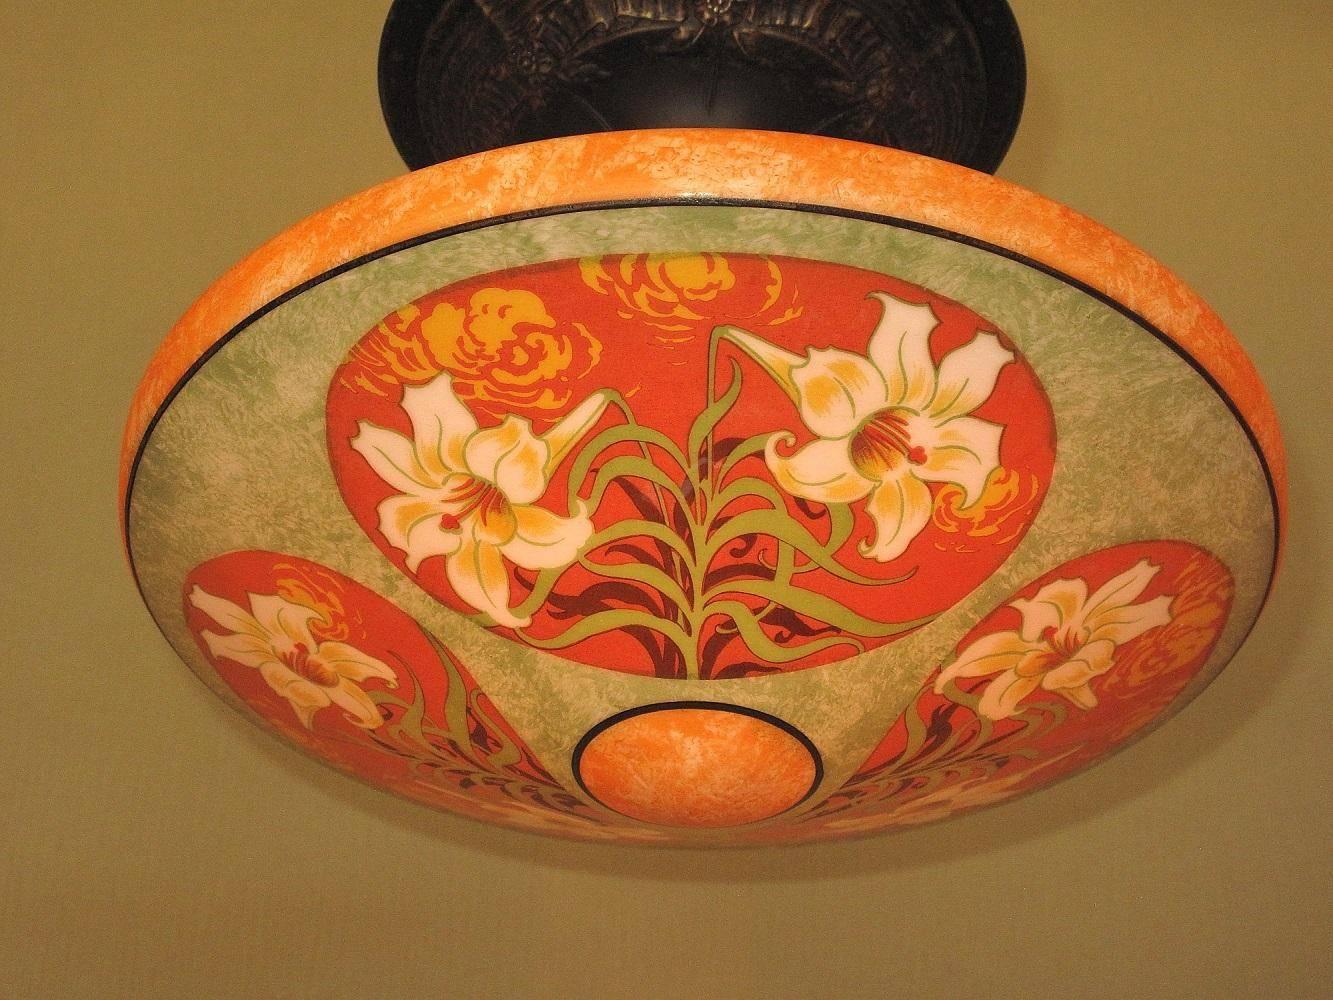 Three beautifully executed medallions of white Asian lilies set against an orange background with clouds also in the Asian fashion. The green leaves of the lilies are set against a shadow of the leaves creating a feeling of depth in the painting.